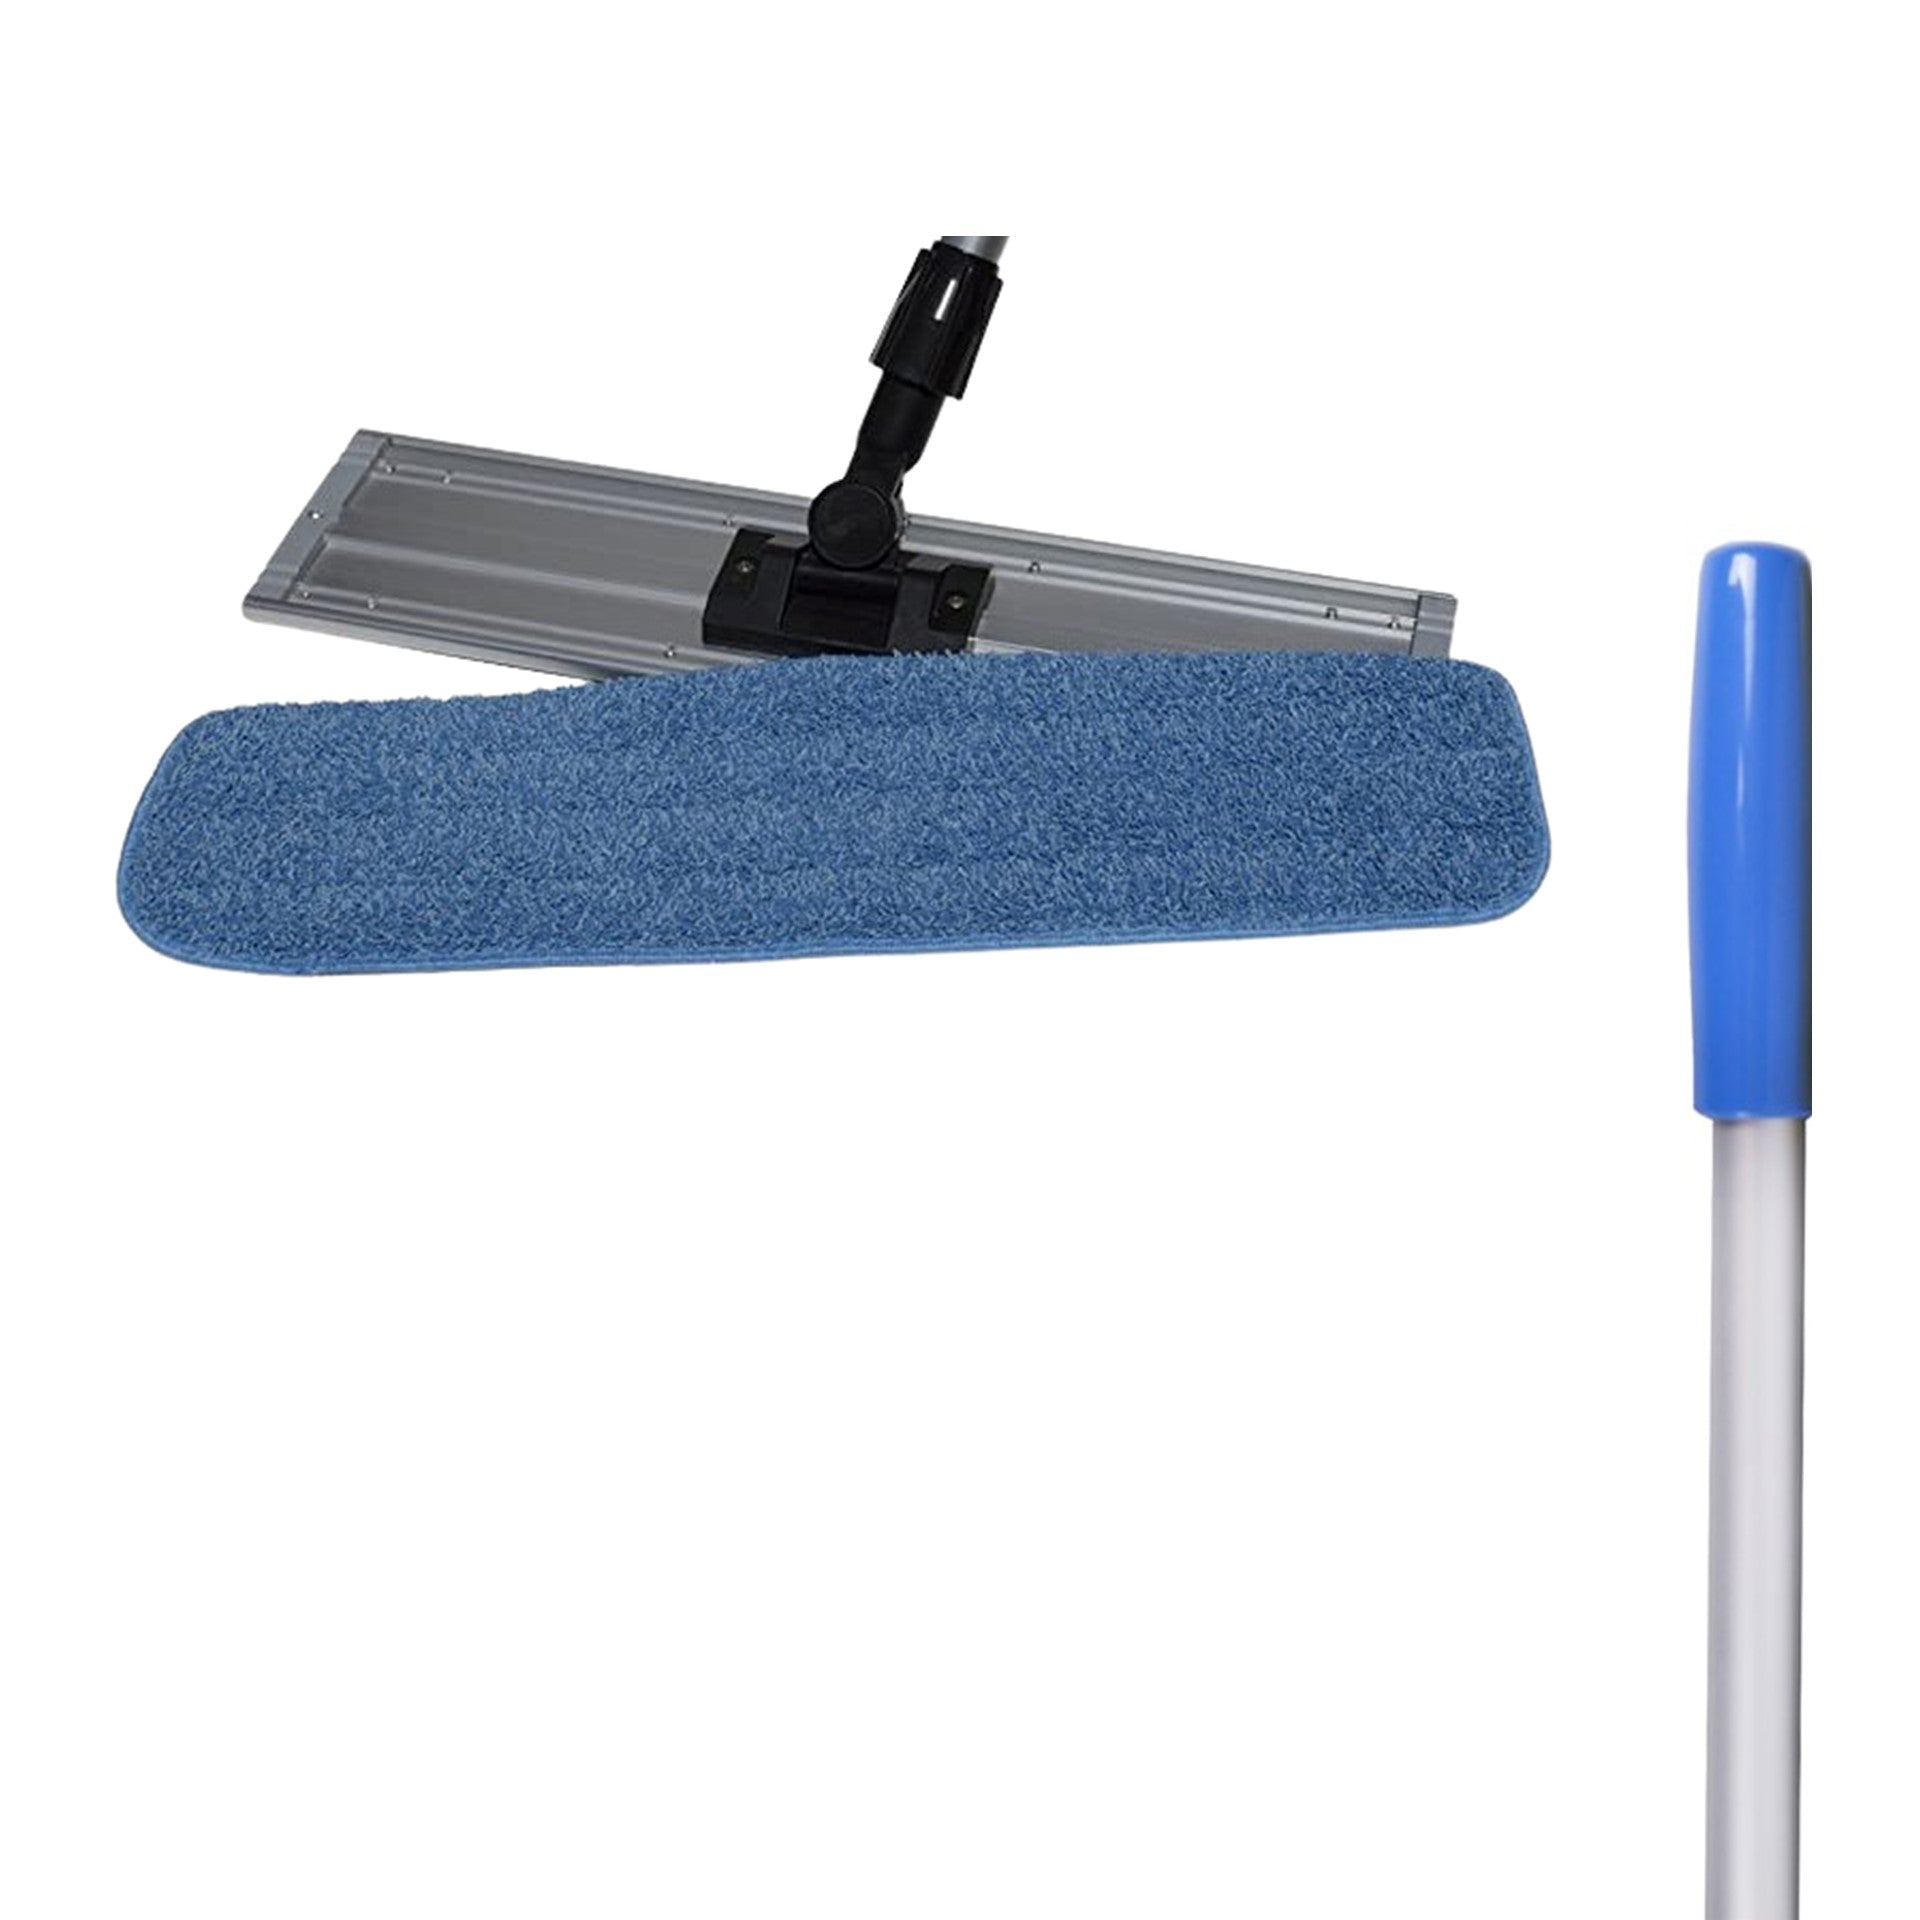 Groet Margaret Mitchell atmosfeer Microfiber Wet Mop 40CM (Blue) With Frame & Aluminium Handle - Vita - Made  in Taiwan | Daitona General Trading LLC | Cleaning & Janitorial Product  Supplier in Dubai, UAE